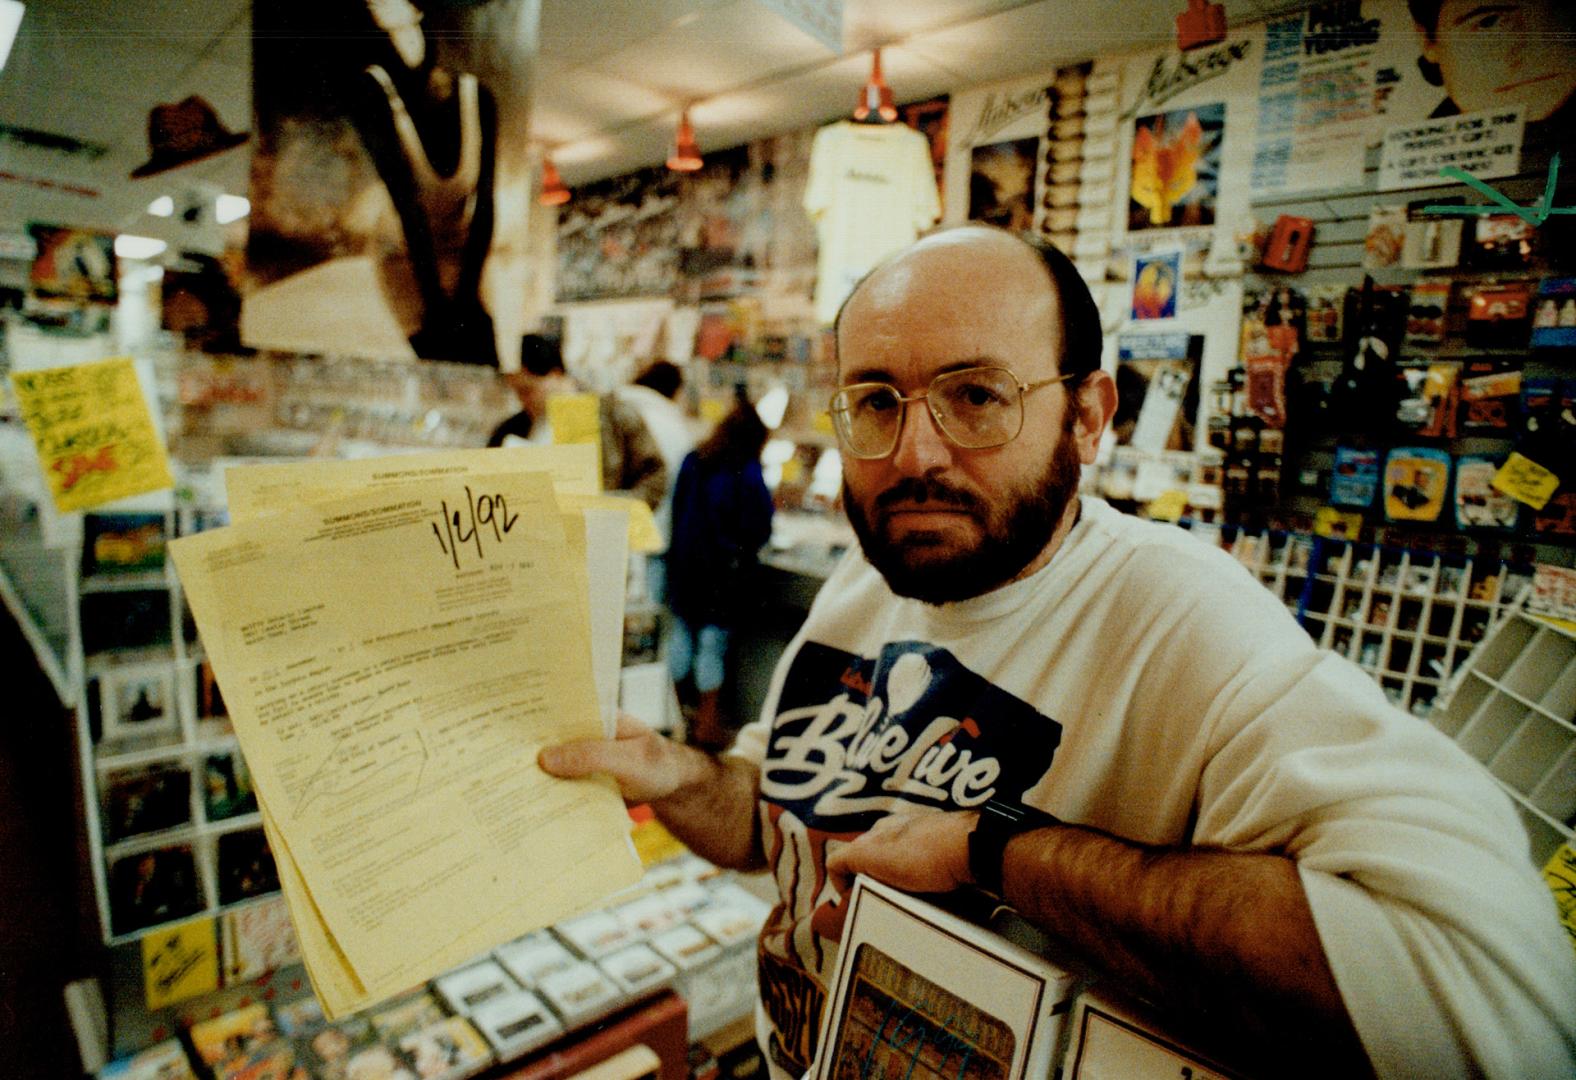 Sour note: North York record store owner Marty Herzog, who was charged for being open yesterday, already has a sheaf of summonses for the same offence